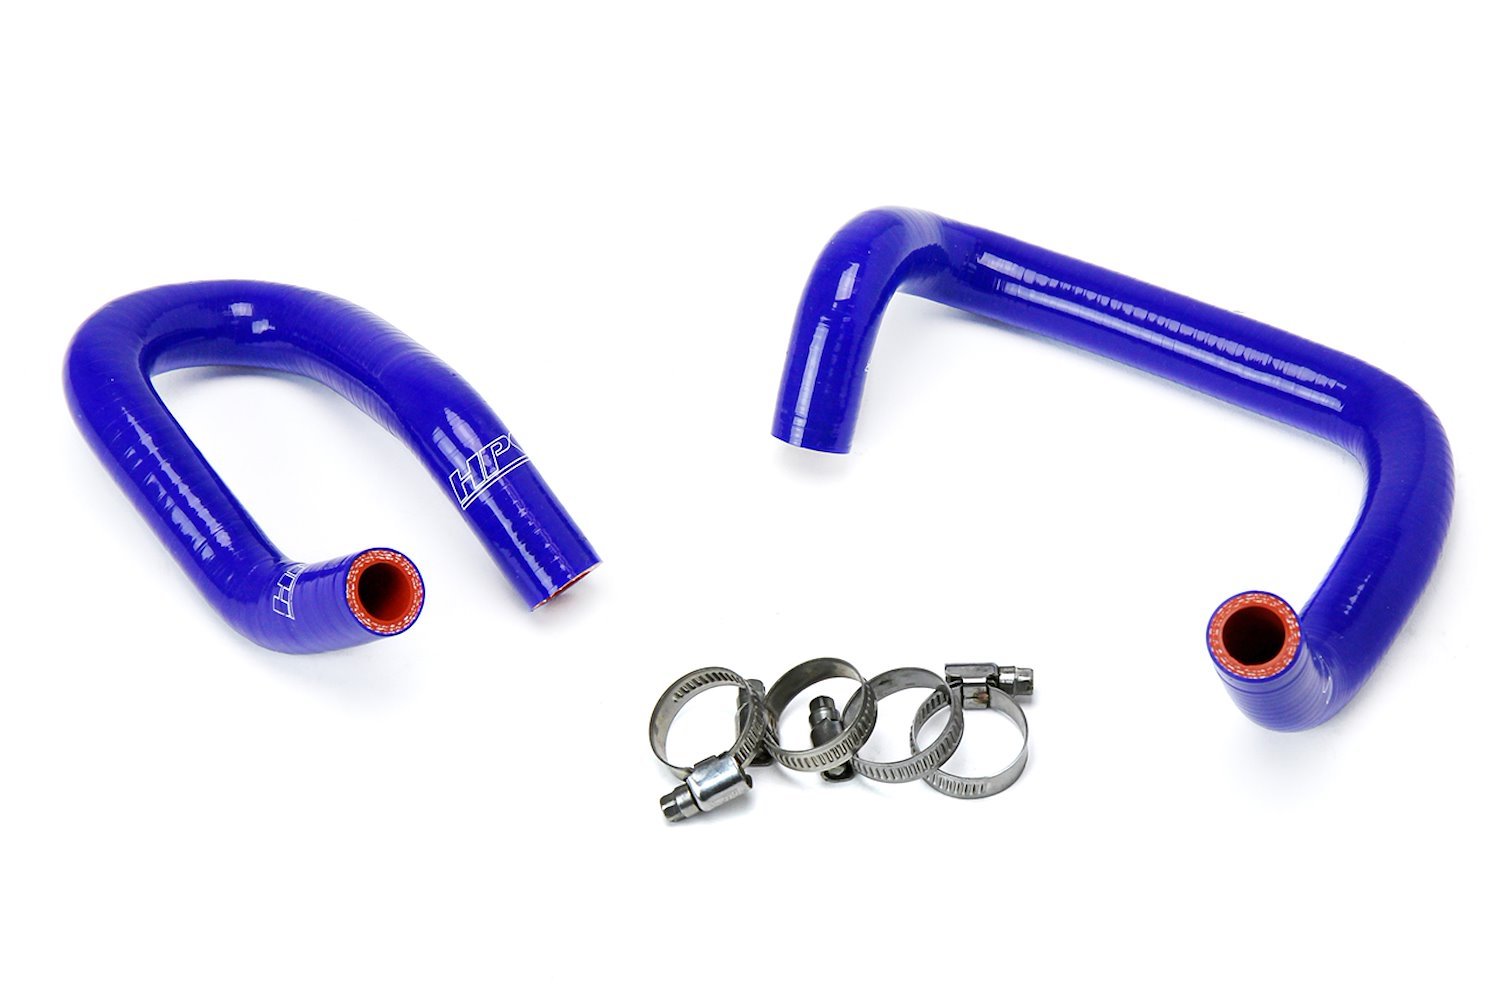 57-1586-BLUE Heater Hose Kit, High-Temp 3-Ply Reinforced Silicone, Replace OEM Rubber Heater Coolant Hoses